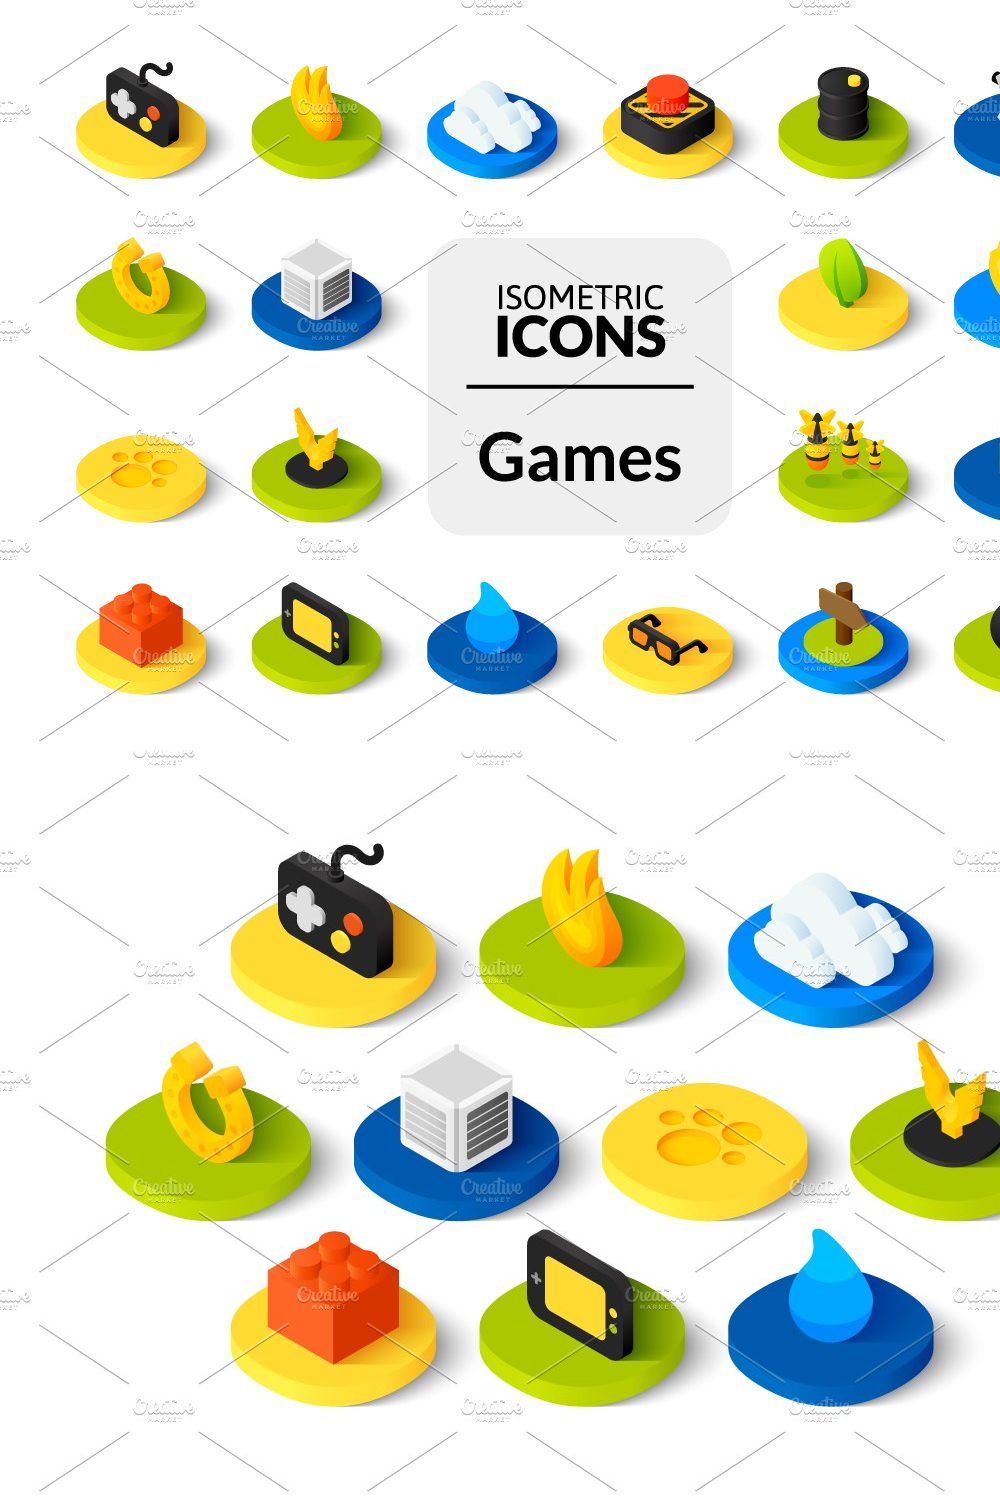 Isometric icons - Games pinterest preview image.